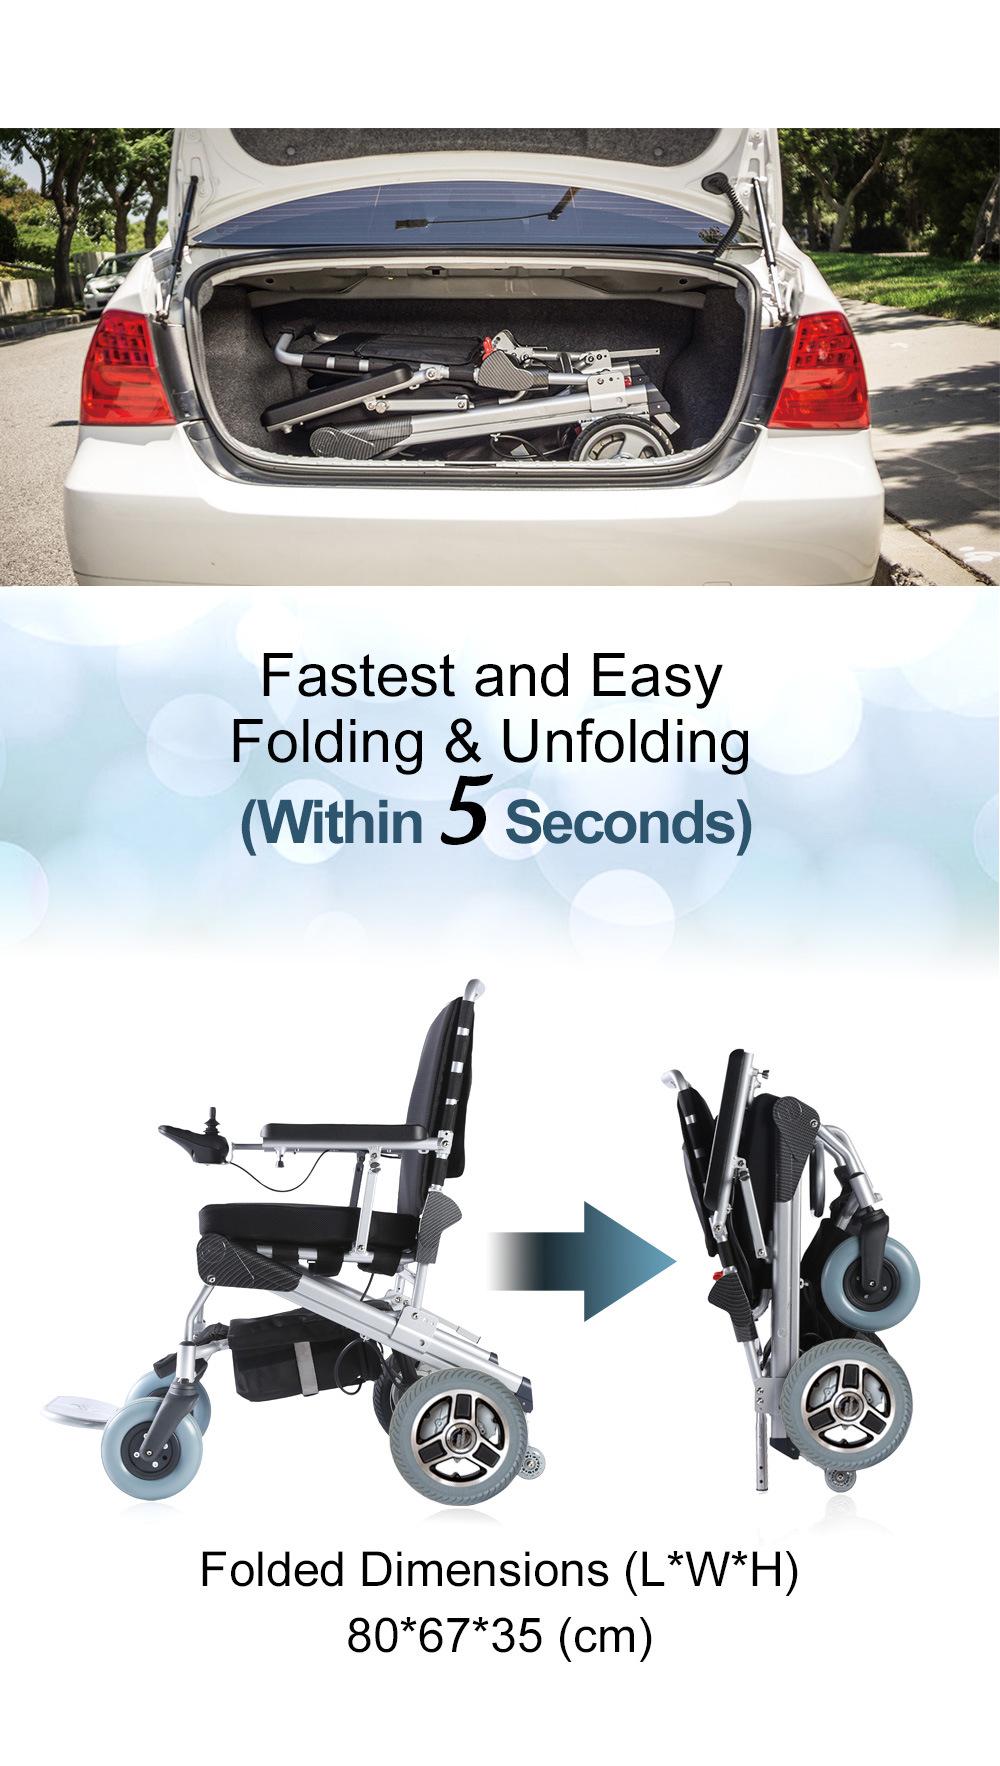 Ultra Strong Fame, Patented Design,East Folding / unfolding, portable and foldable electric mobility wheelchair with 10′′ quick release motors, 15kg only